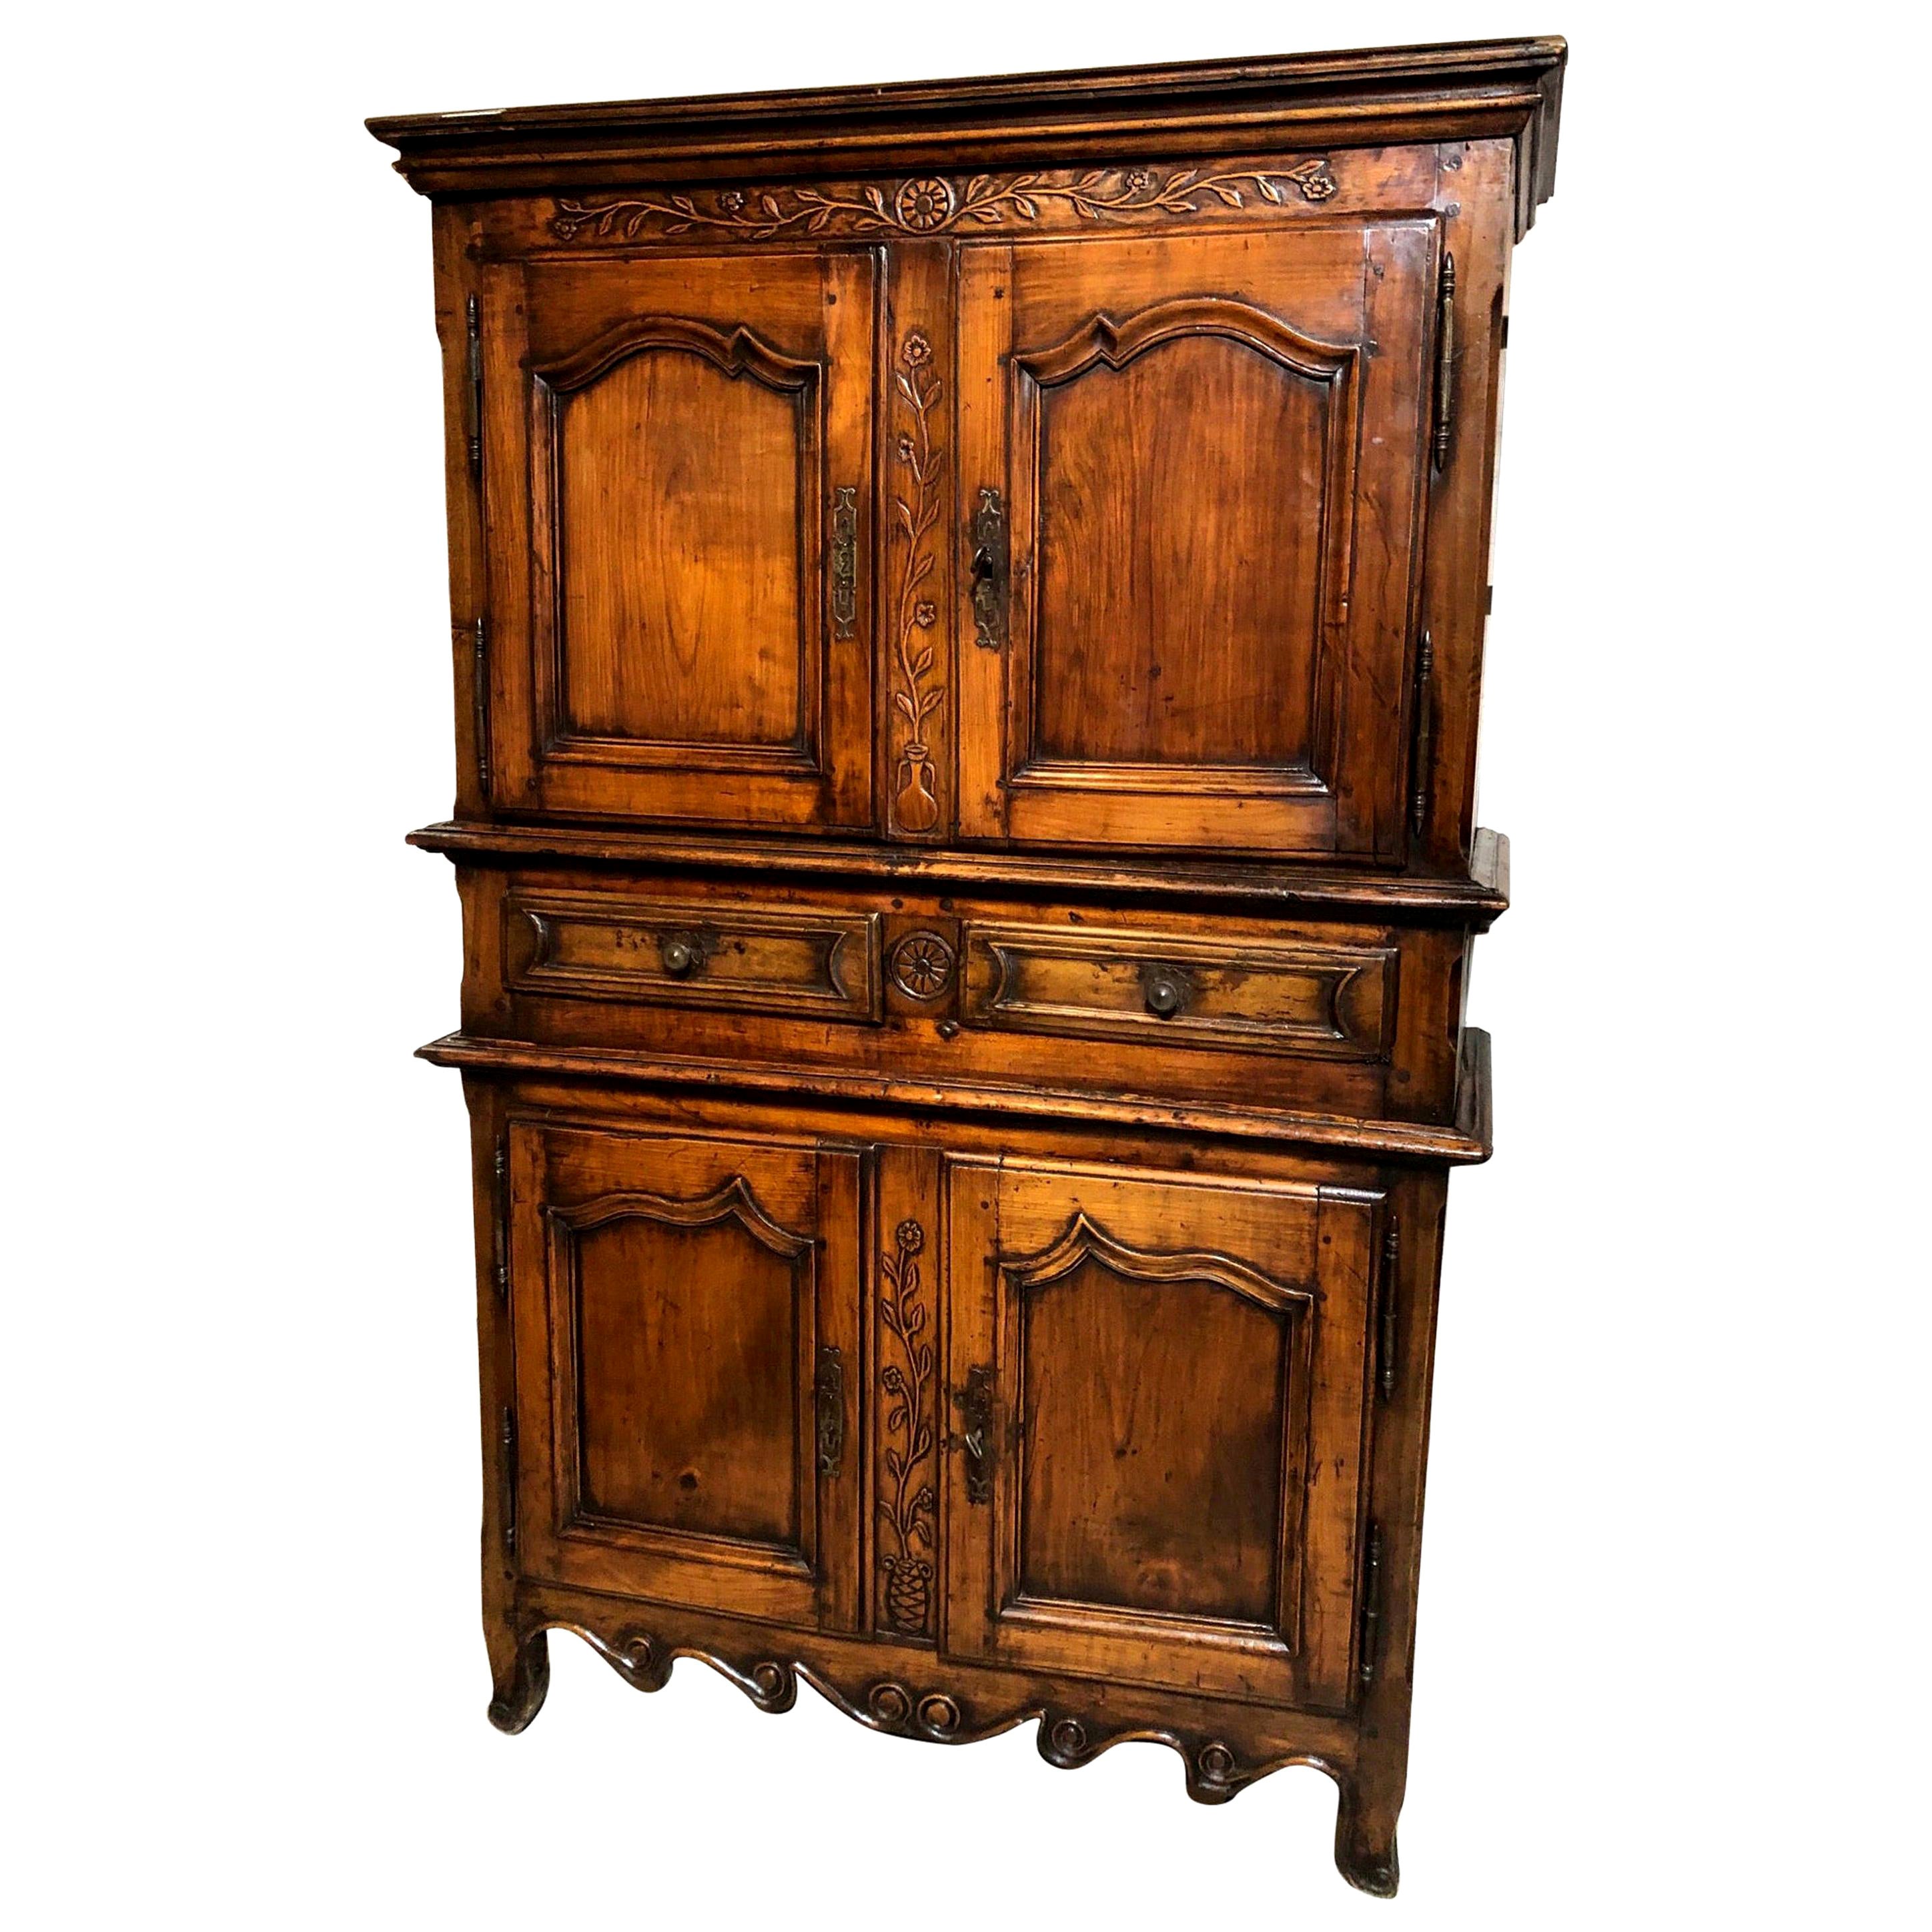 Early 19th Century Louis XV Style French Provincial Pear Wood Tall Buffet